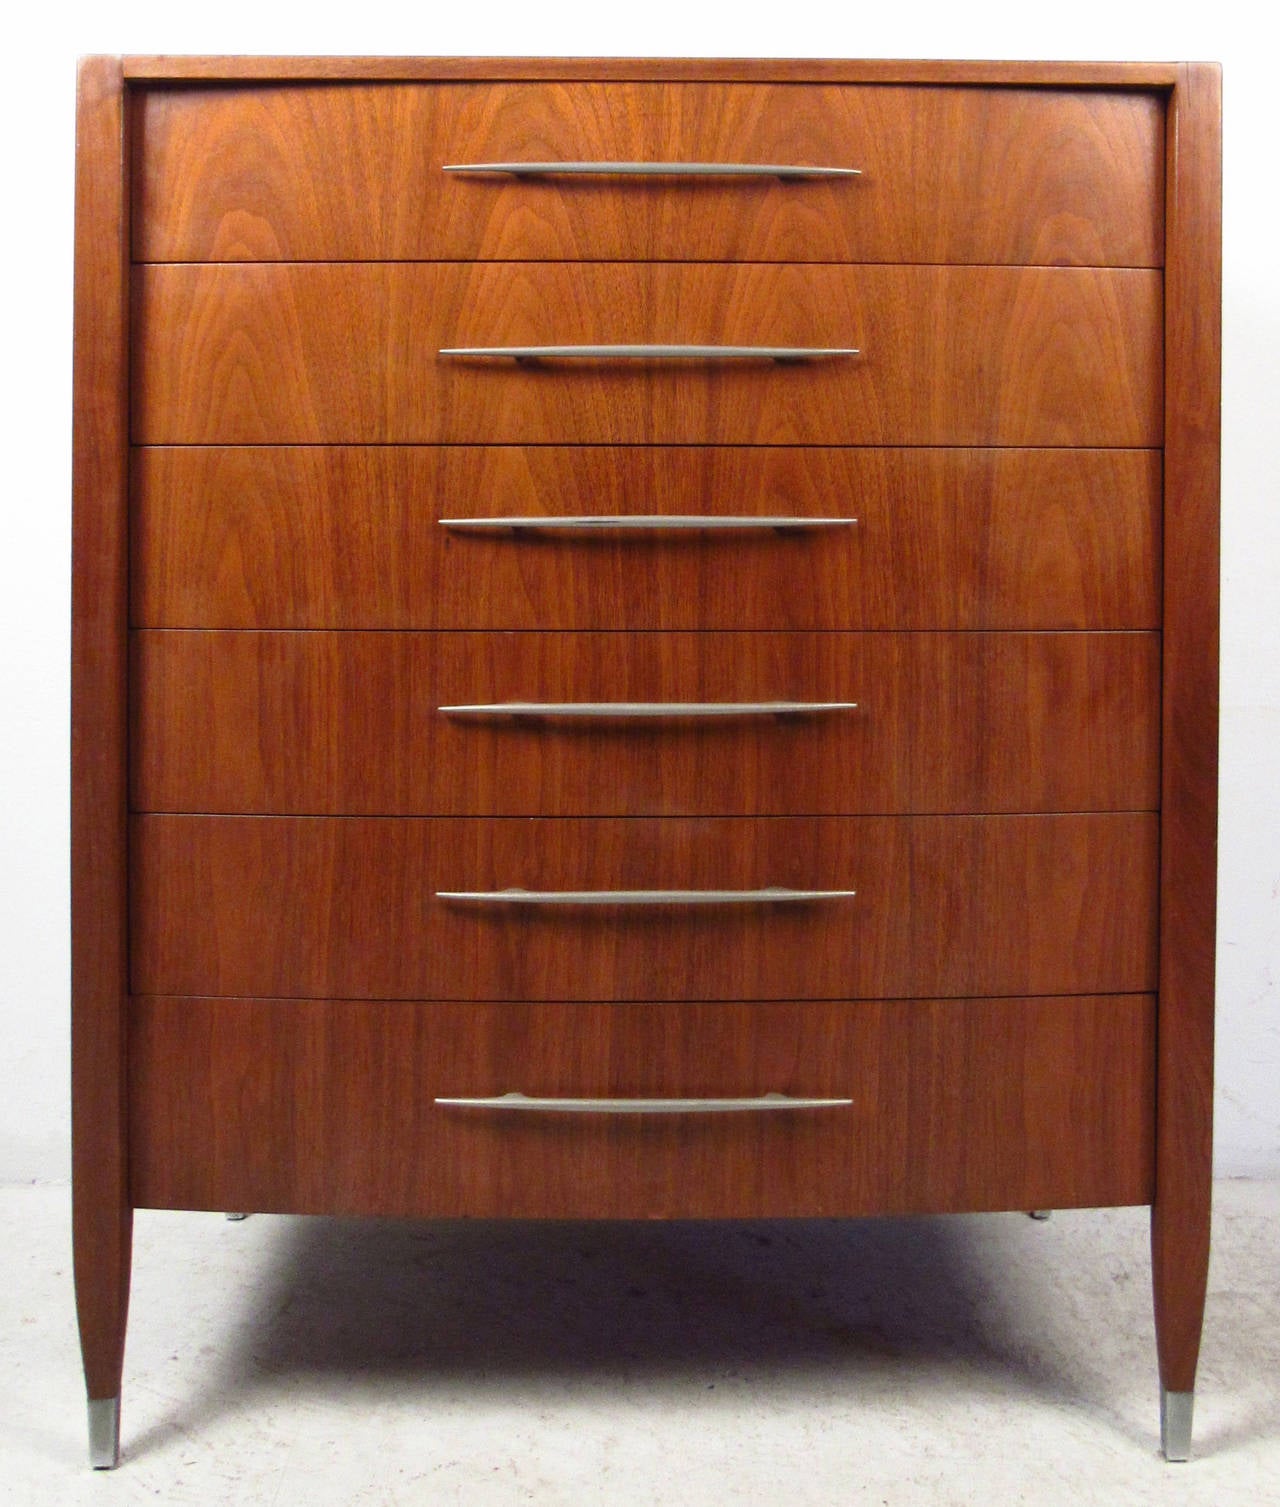 Vintage-modern high boy dresser by Sligh Furniture, features six drawers with unique chrome handles, and sculpted chrome capped feet. This well made case piece ensures plenty of room for storage within its six hefty drawers. The vintage walnut